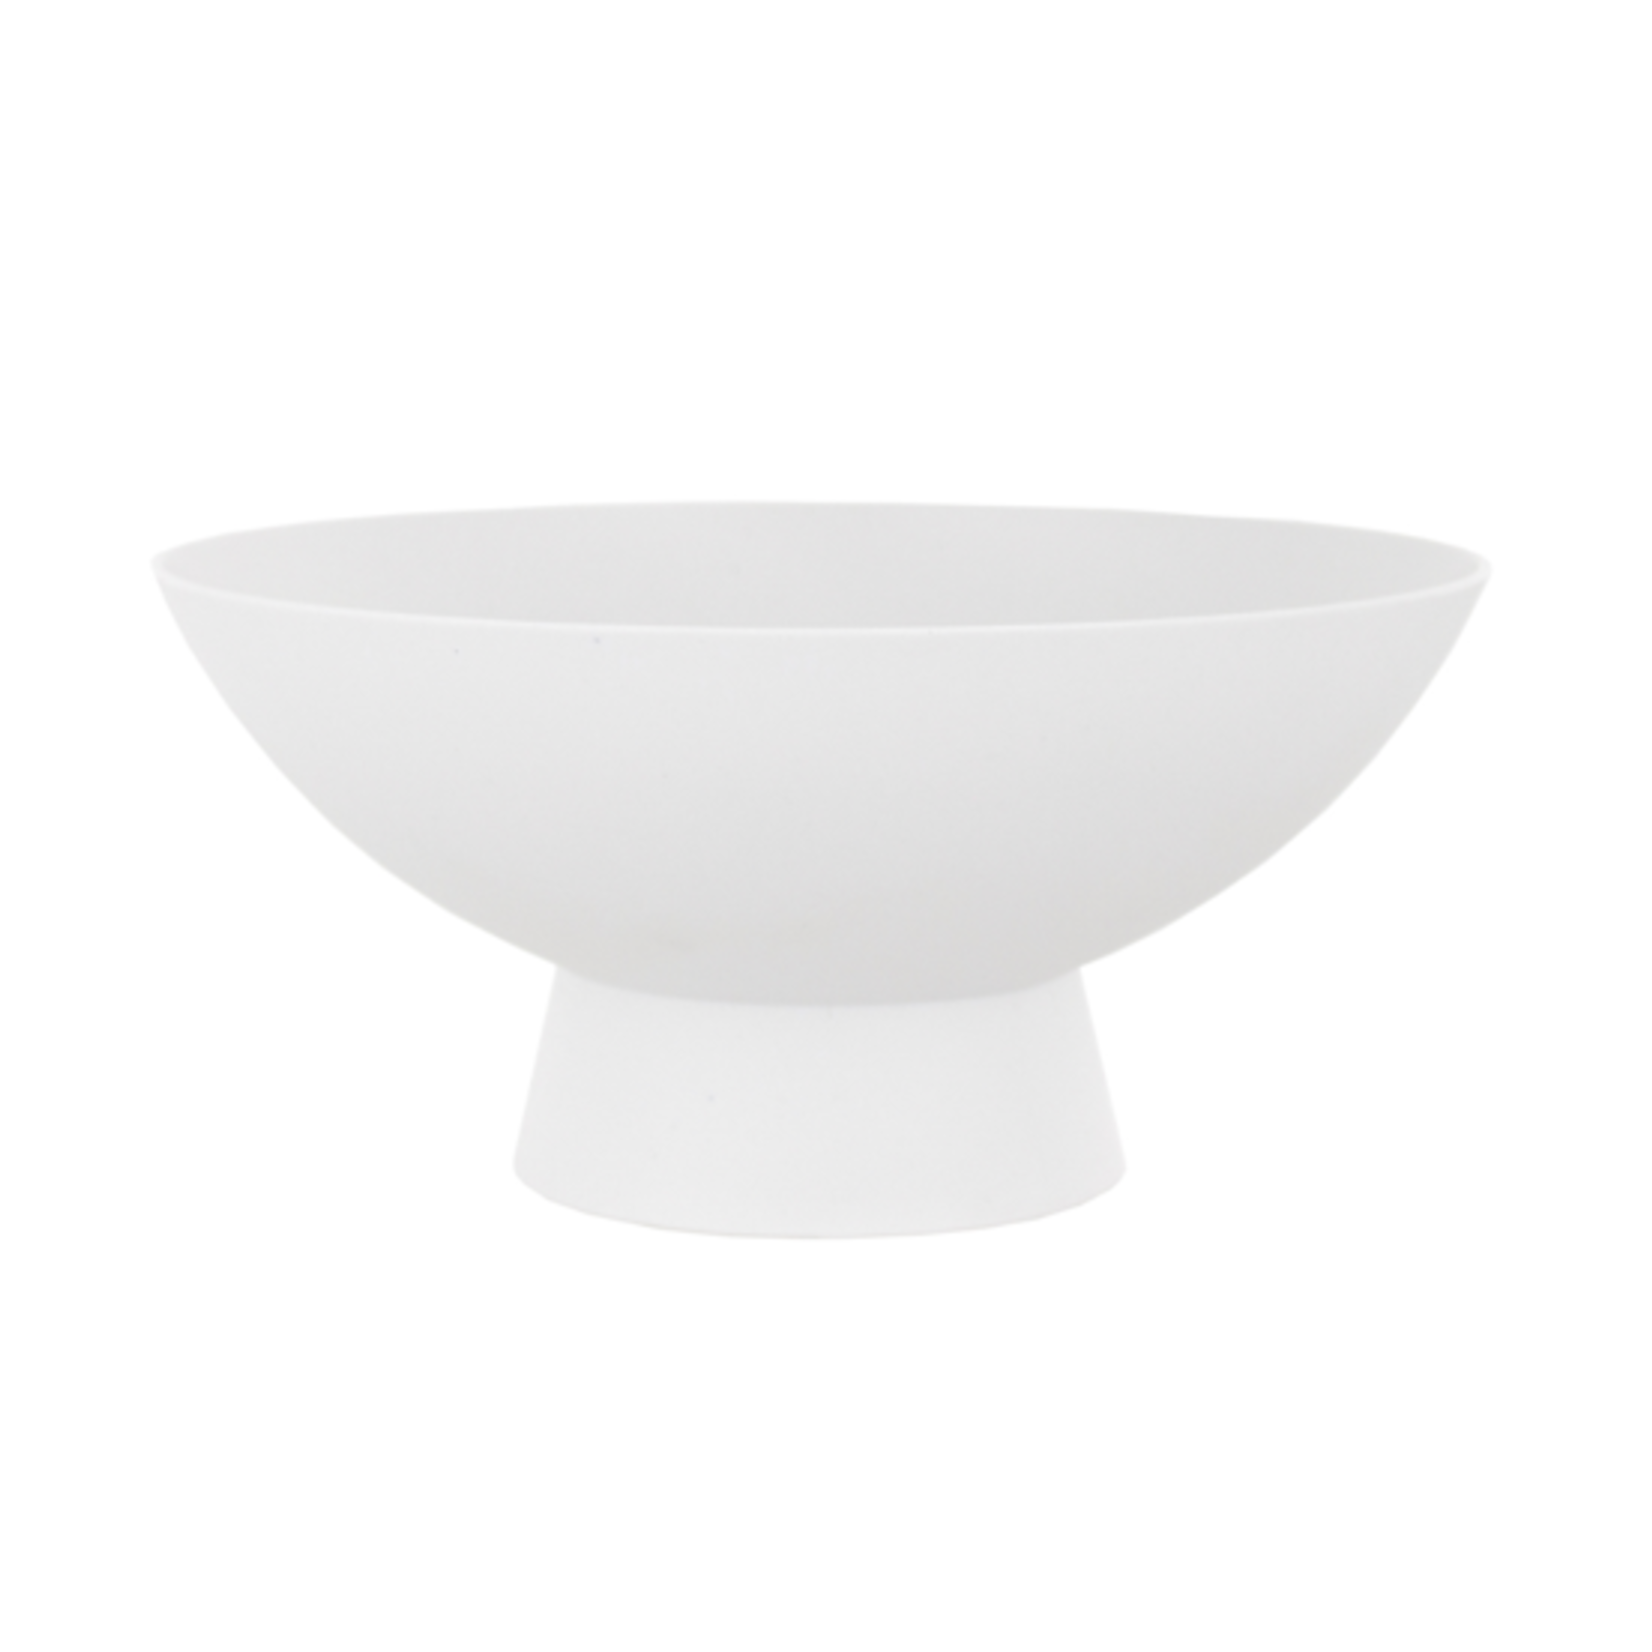 6”H X 10”D WHITE DEMI FOOTED BOWL